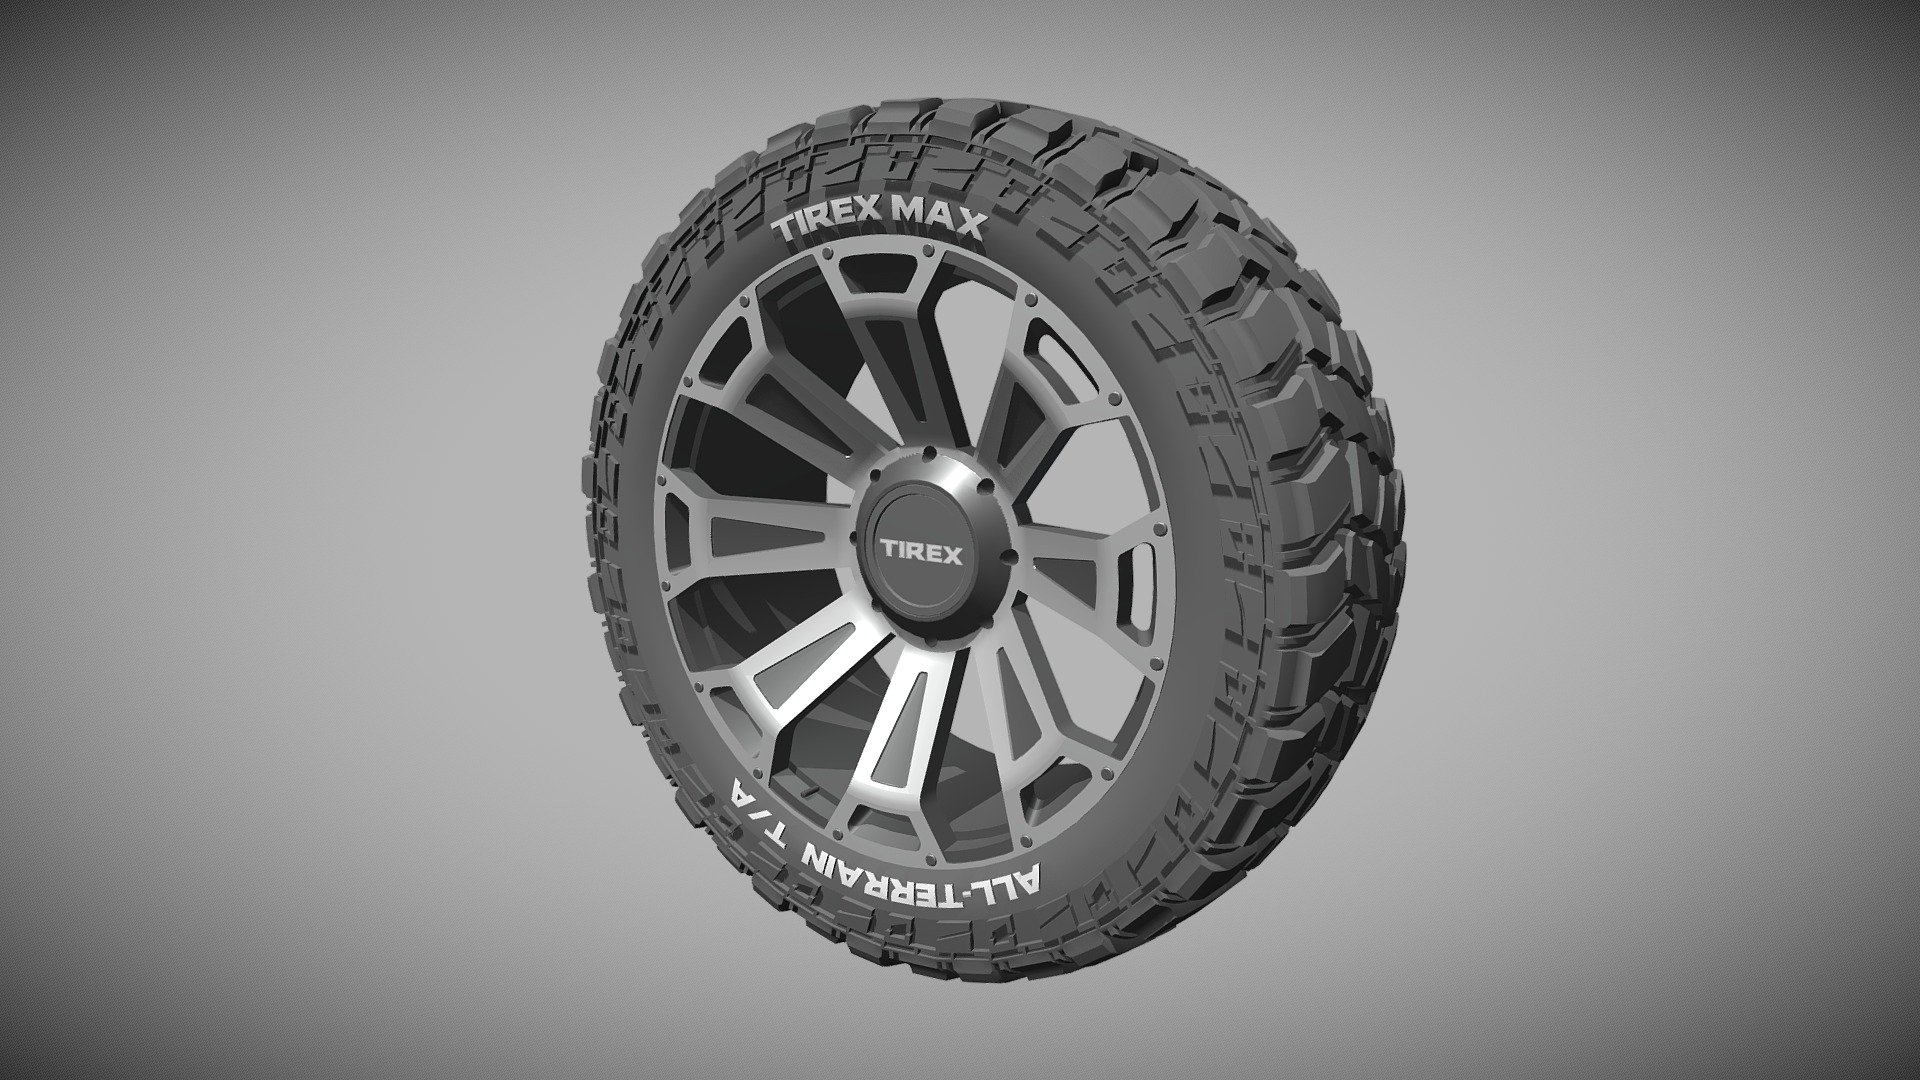 Detailed 3D model of an all terrain tire and rim, modeled in Cinema 4D. The model was created using approximate real world dimensions.

The model has 25,885 polys and 24,296 vertices.

An additional file has been provided containing the original Cinema 4D project file, textures and other 3d format such as 3ds, fbx and obj 3d model